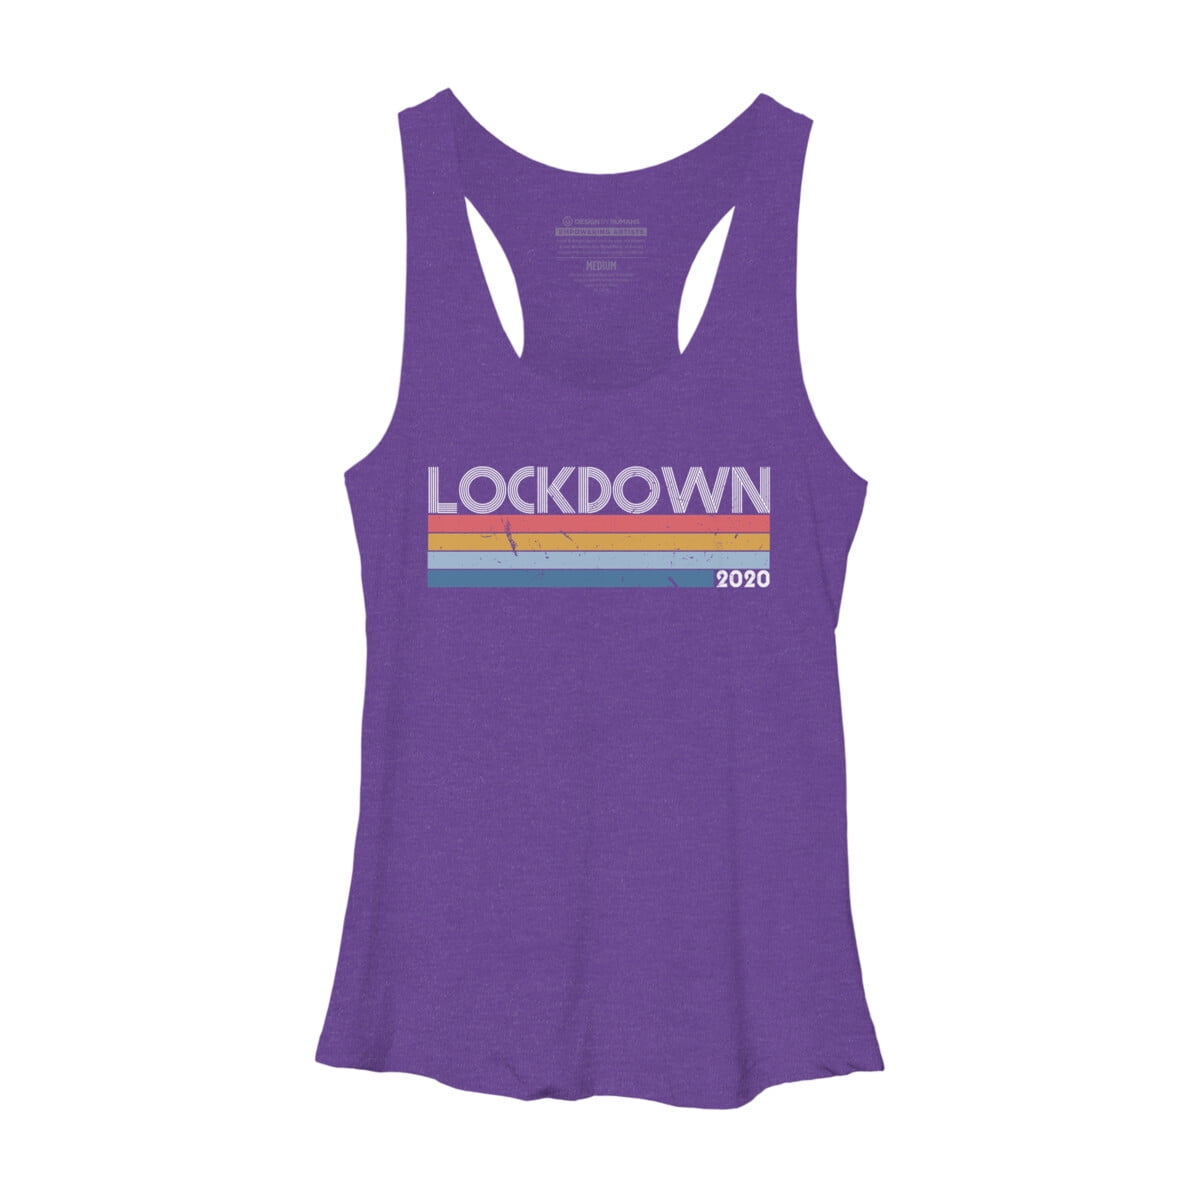 Vintage Lockdown Social Distancing 2020 Womens Black Heather Graphic  Racerback Tank Top - Design By Humans XL 